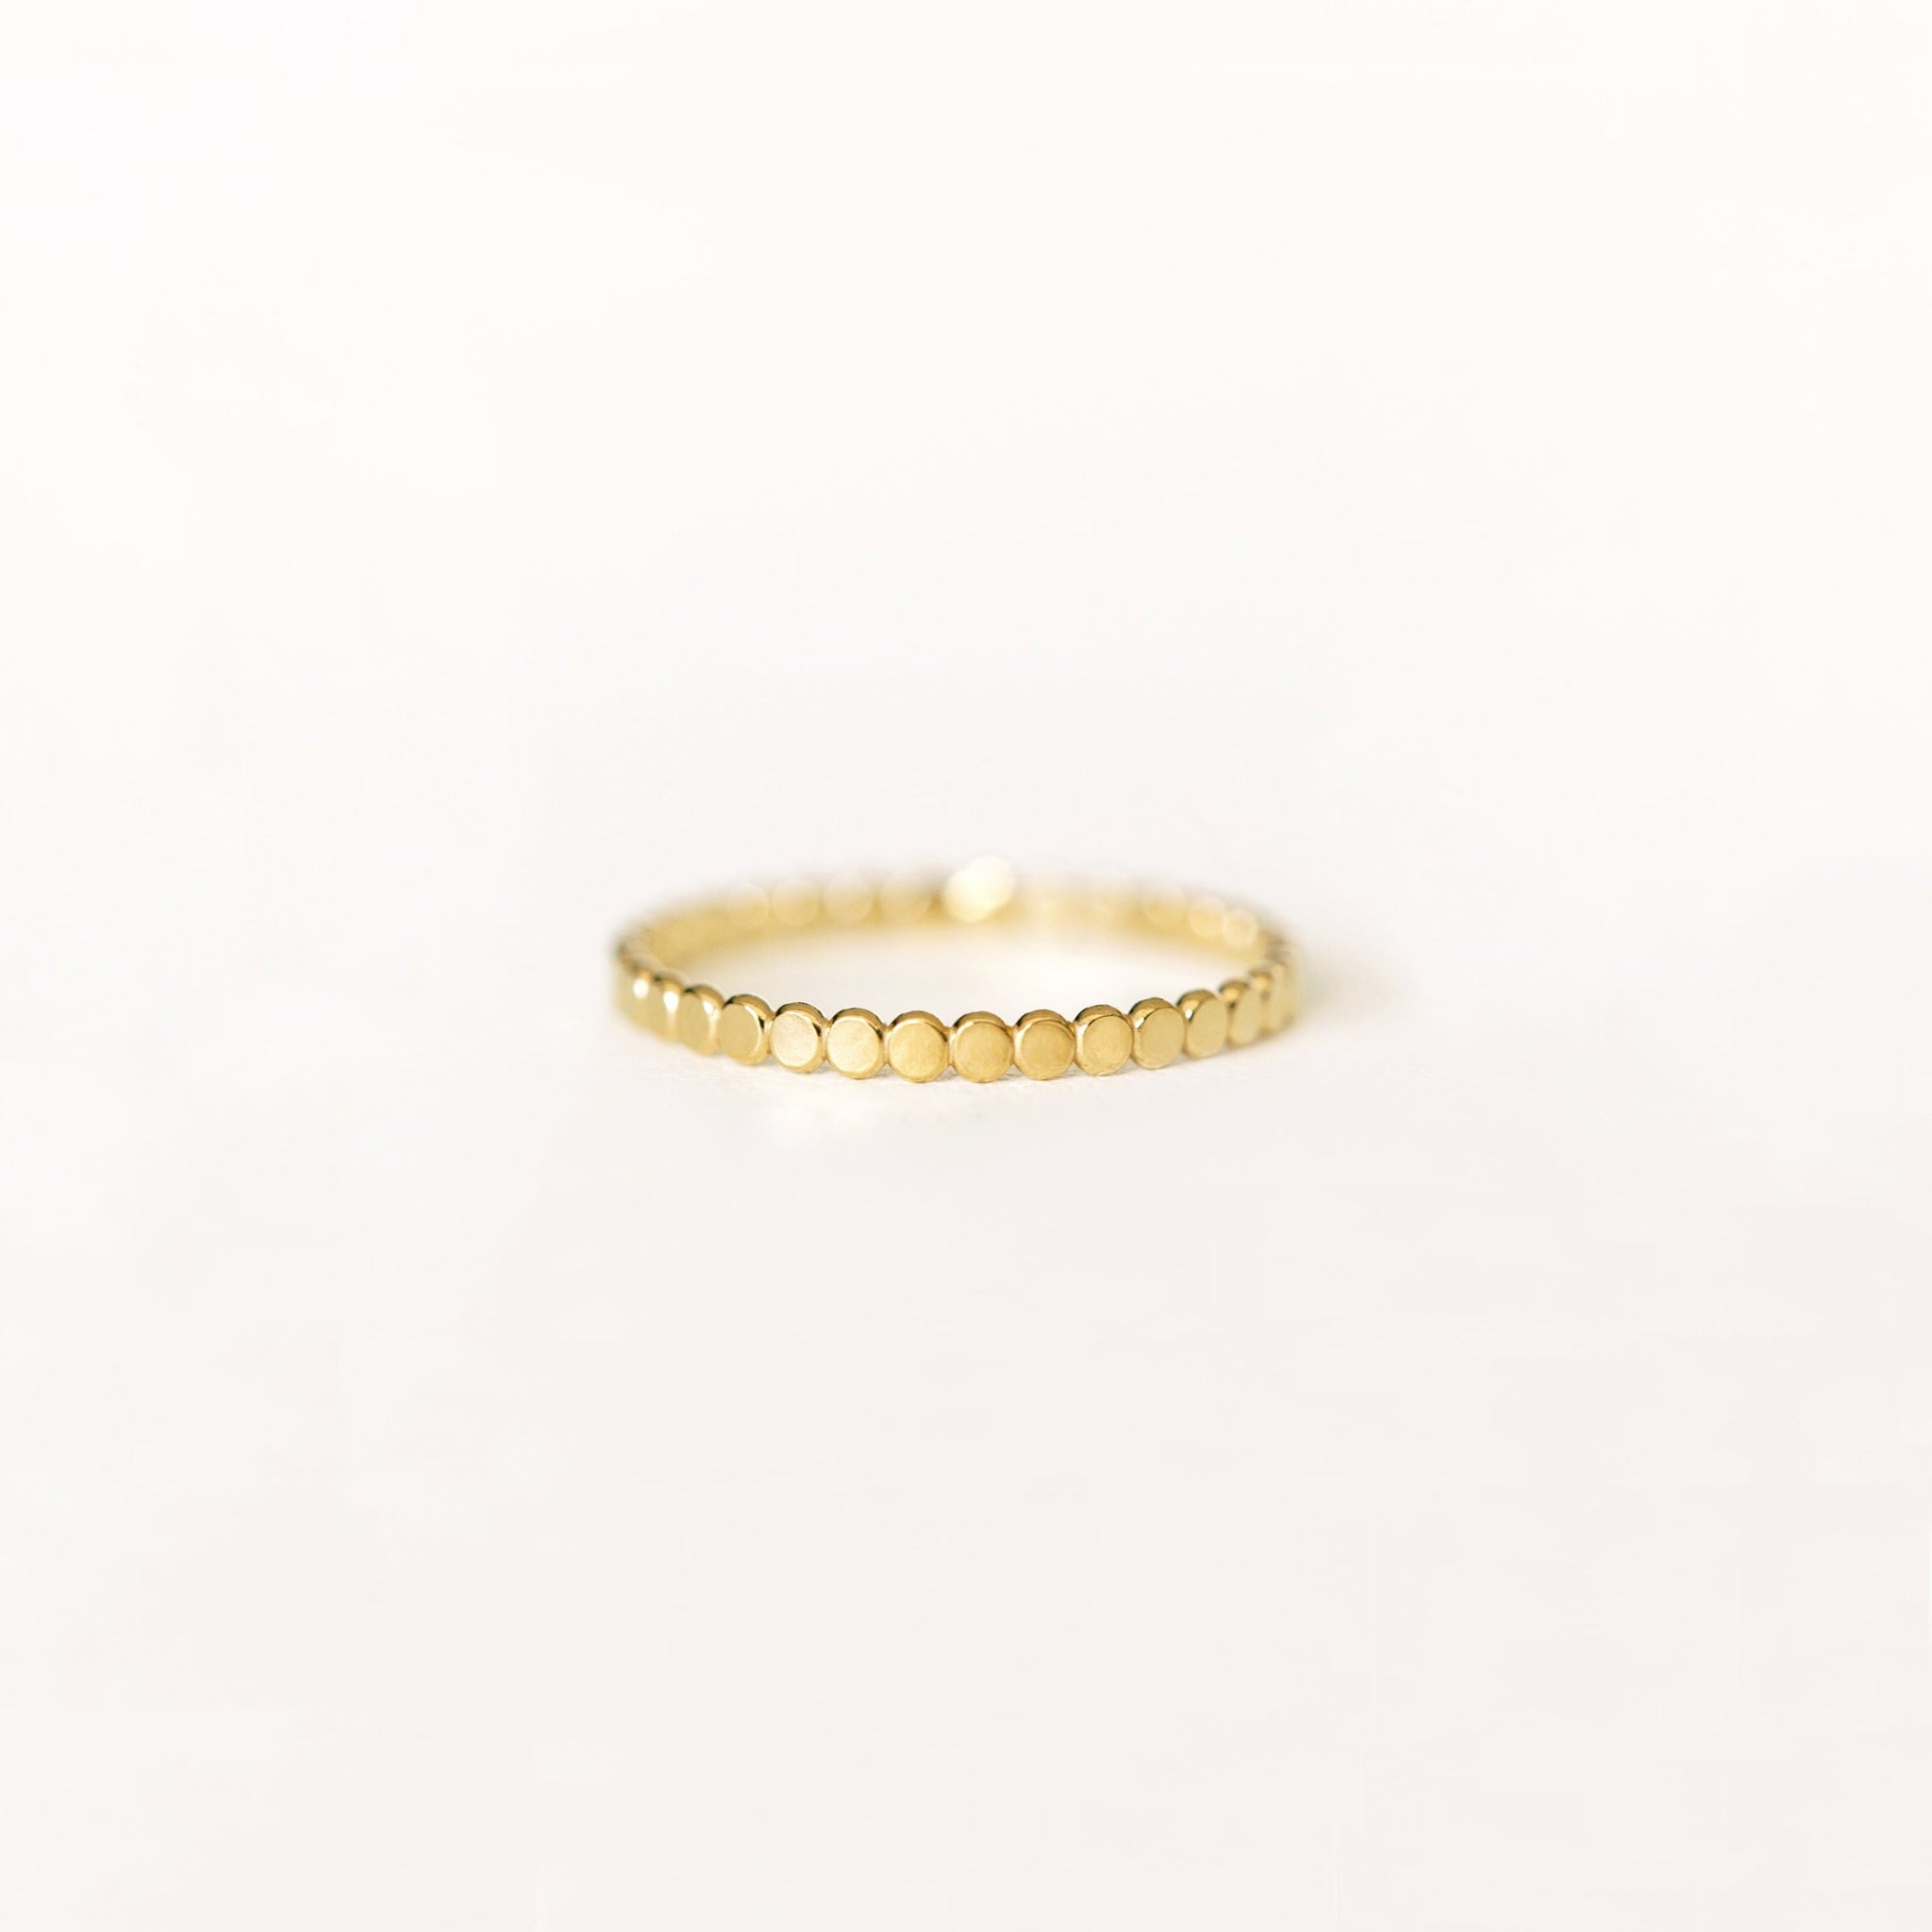 Thin delicate gold ring with tiny dot pattern. Made with recycled 14k gold filled metal.